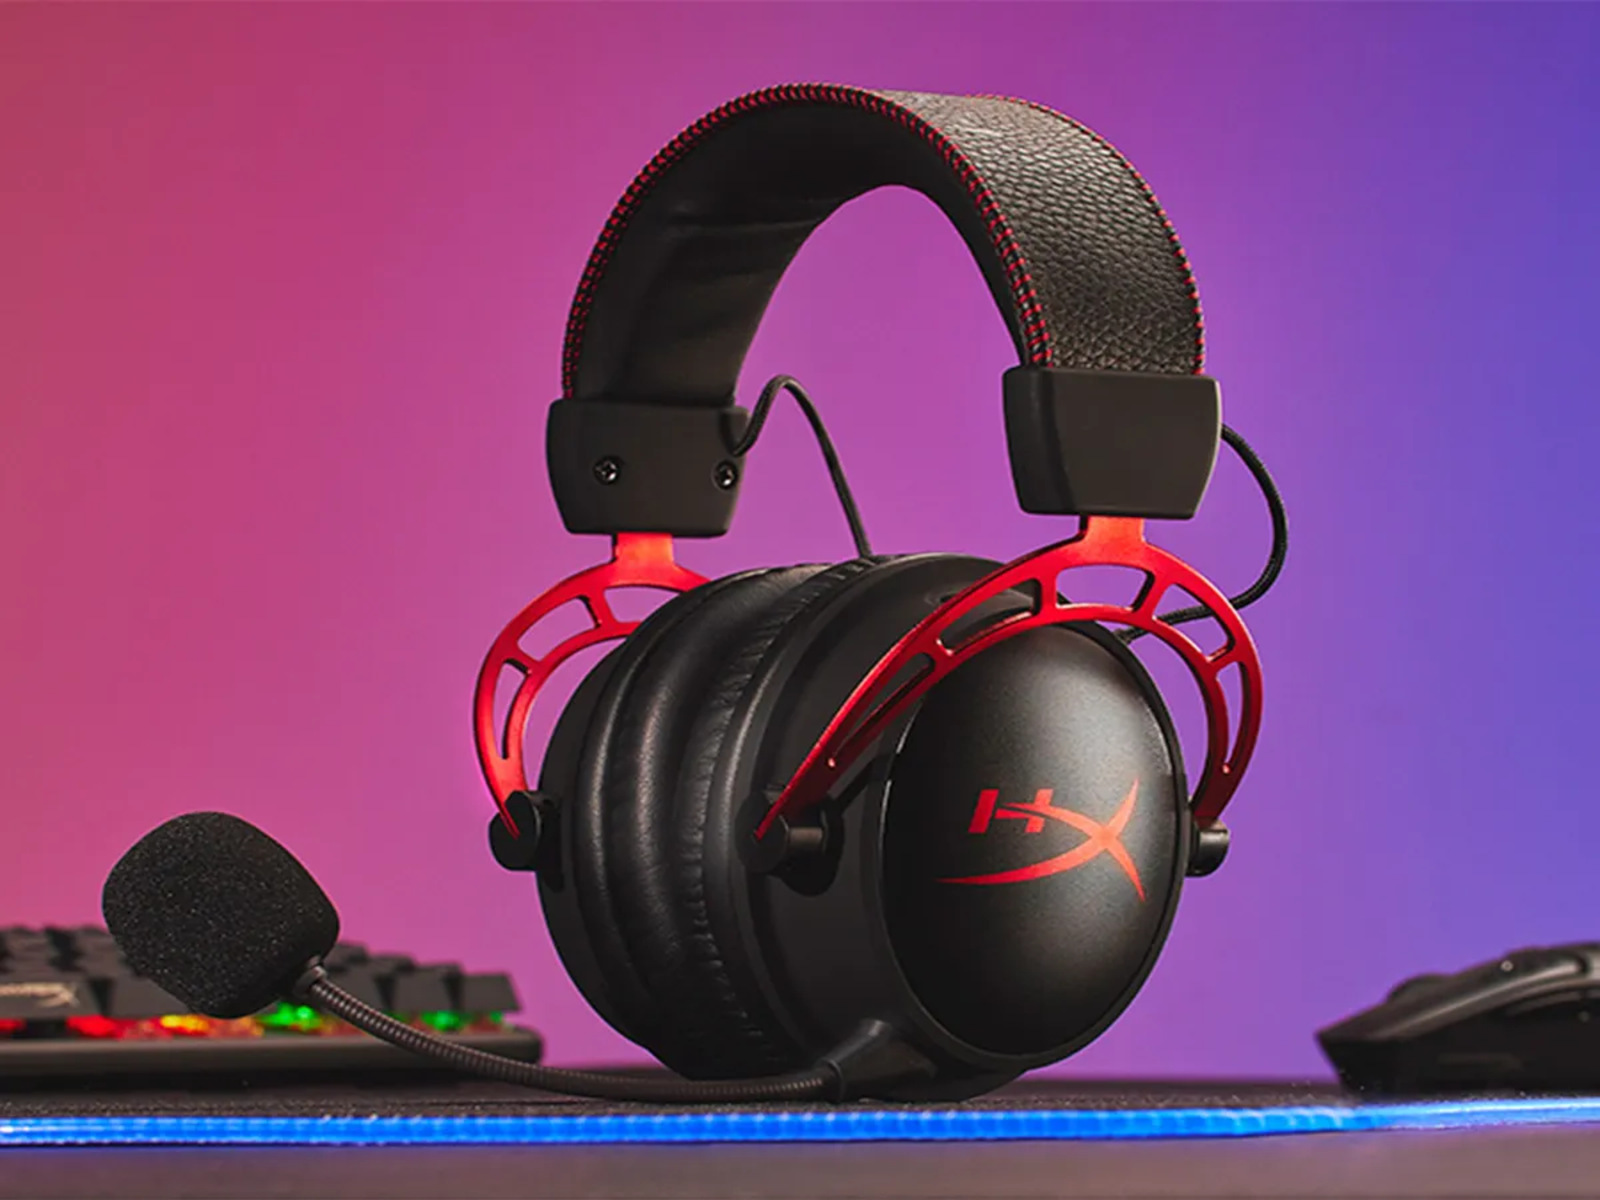 how-long-is-the-cord-of-the-hyperx-cloud-gaming-headset